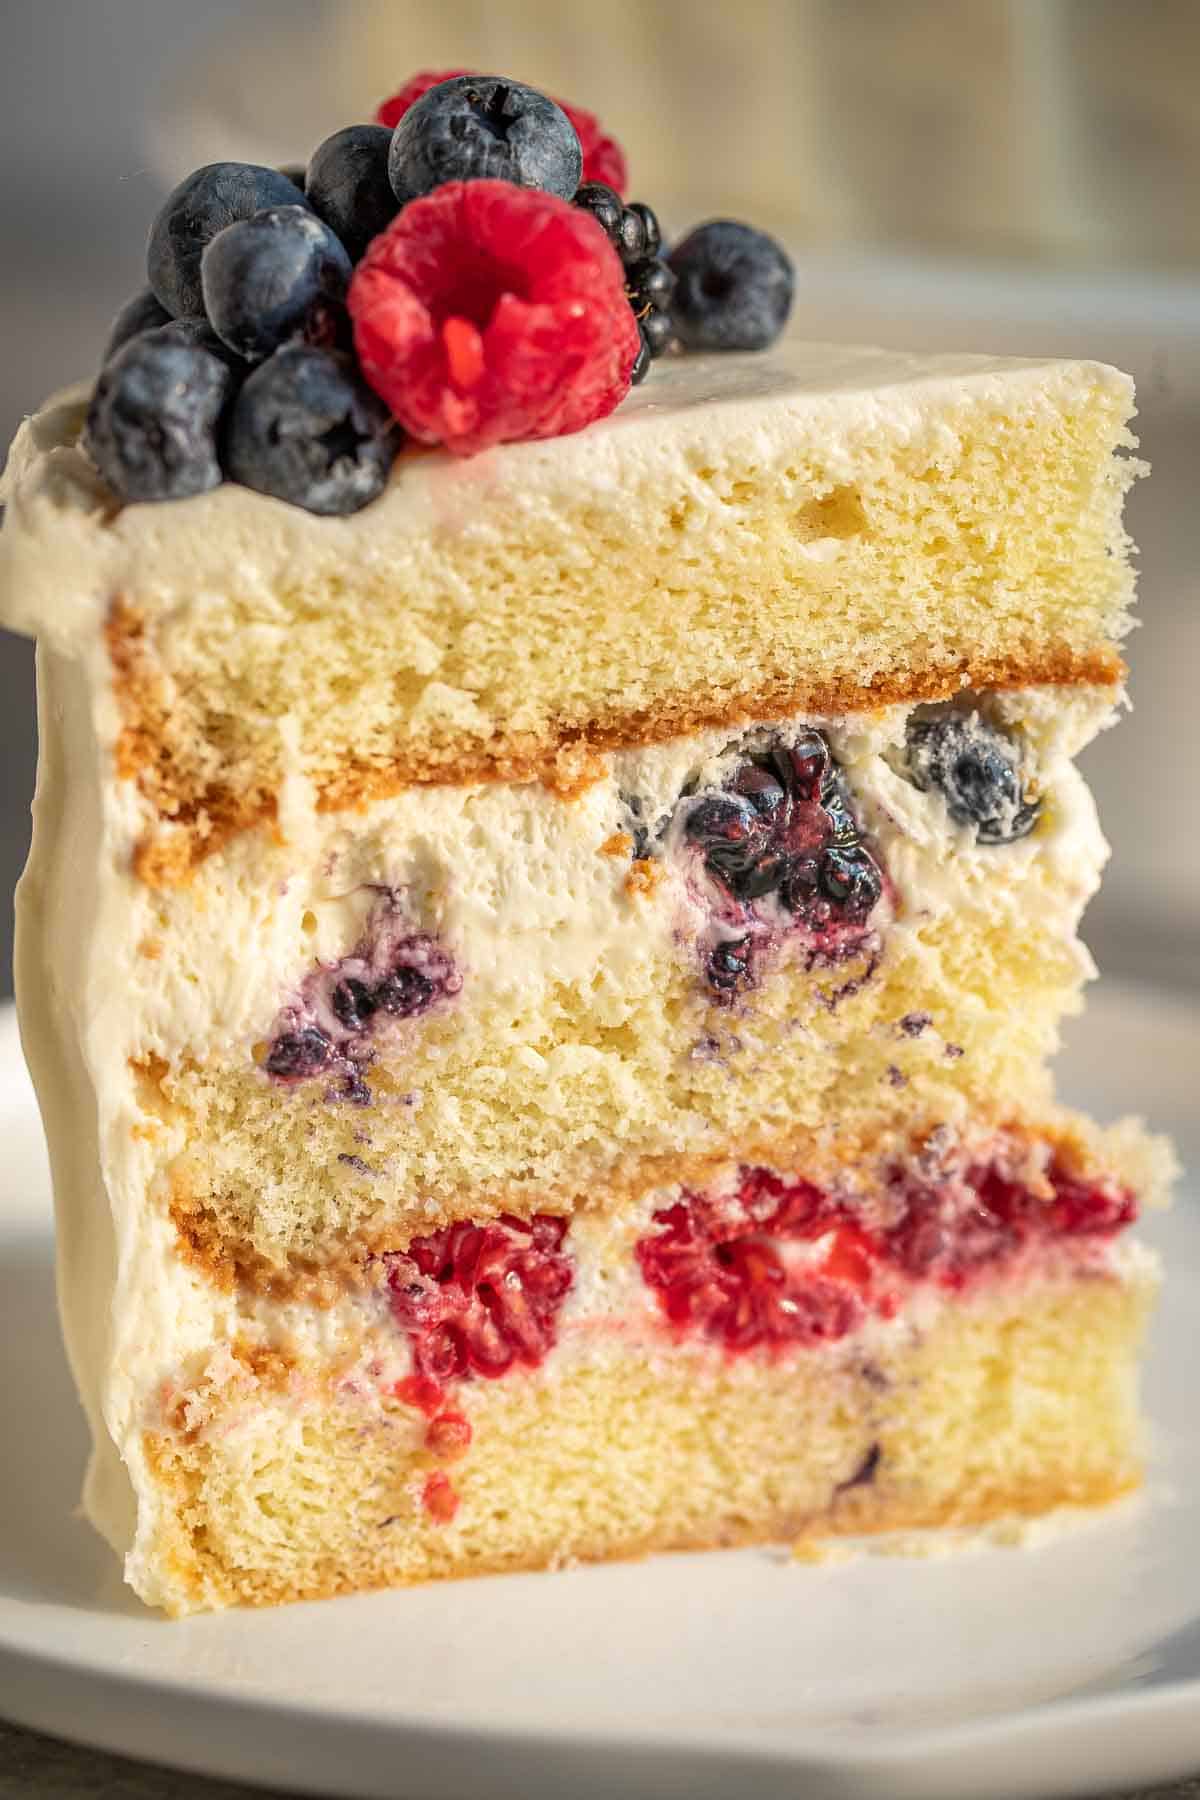 A view of the side of the cake slice with sponge cake, chantilly cream and the berries exposed.